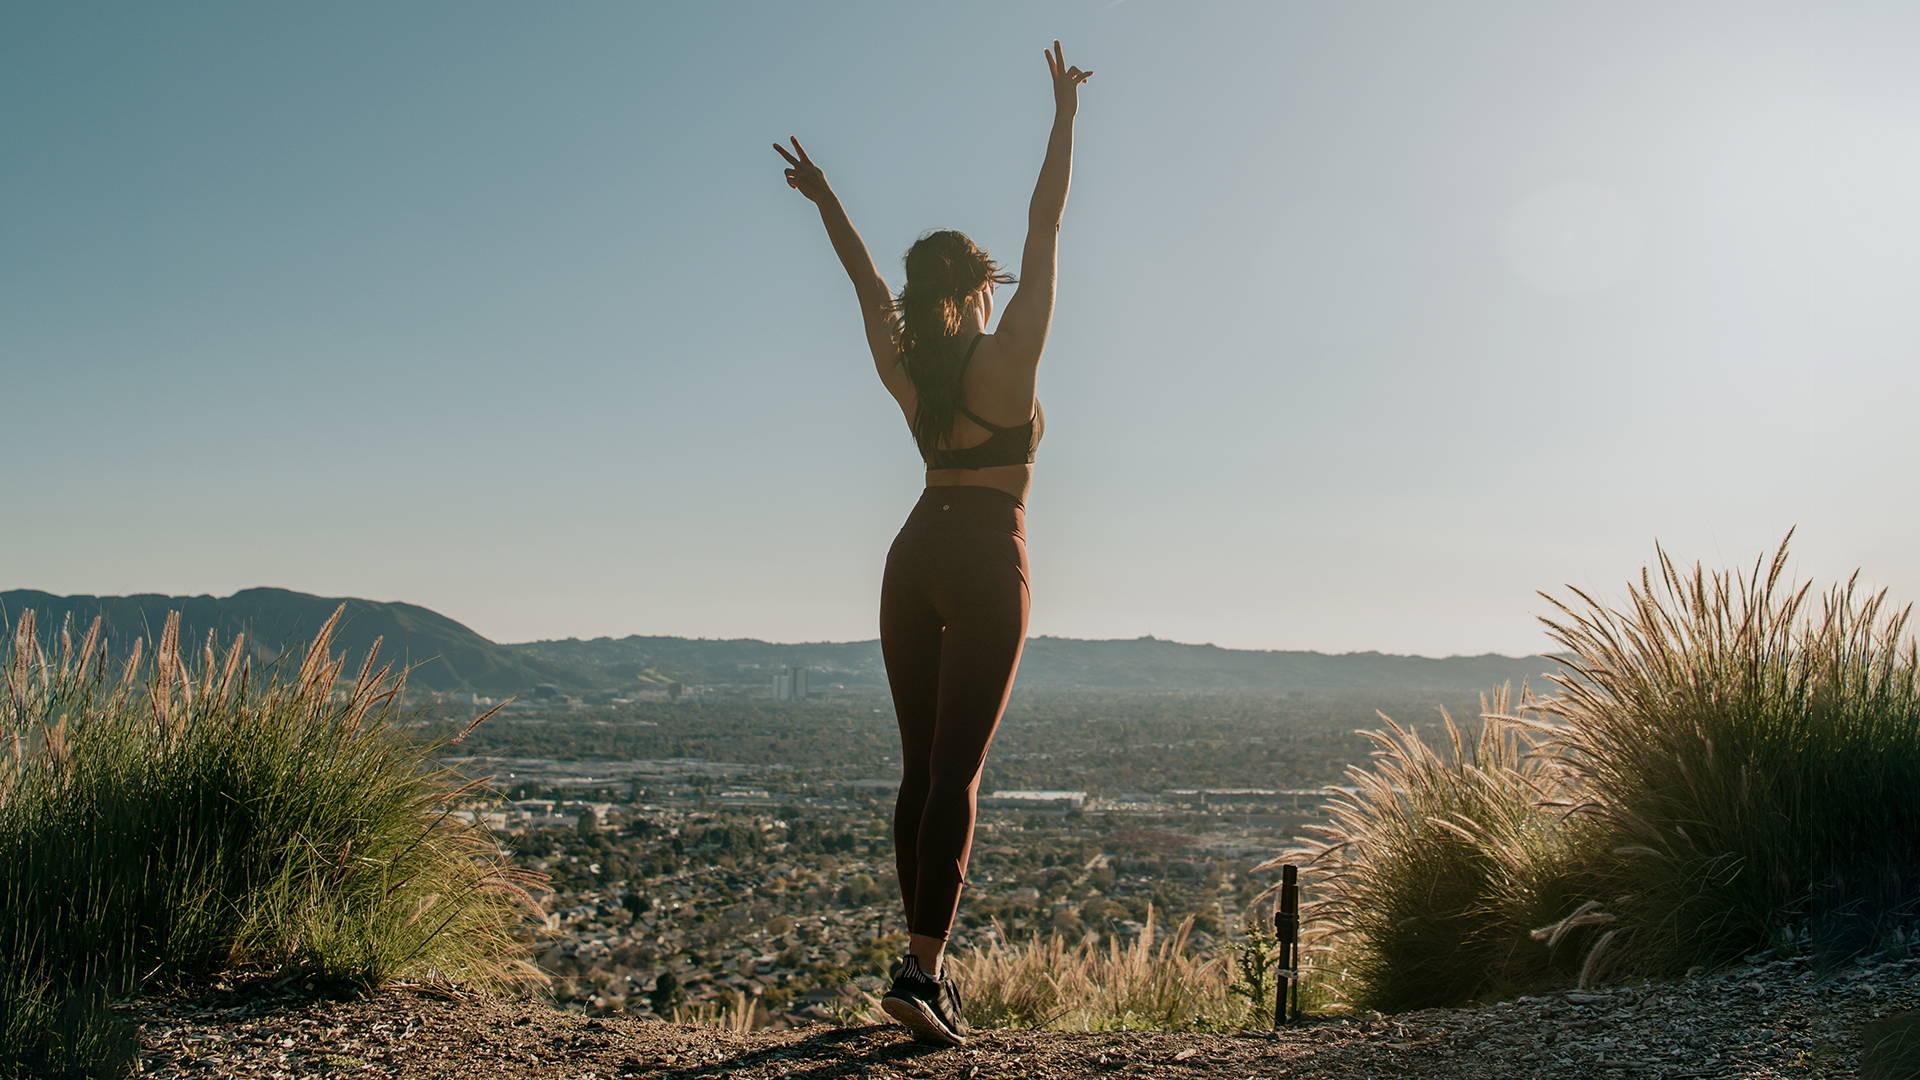 Woman in yoga attire doing two peace signs in the air over looking a large landscape.